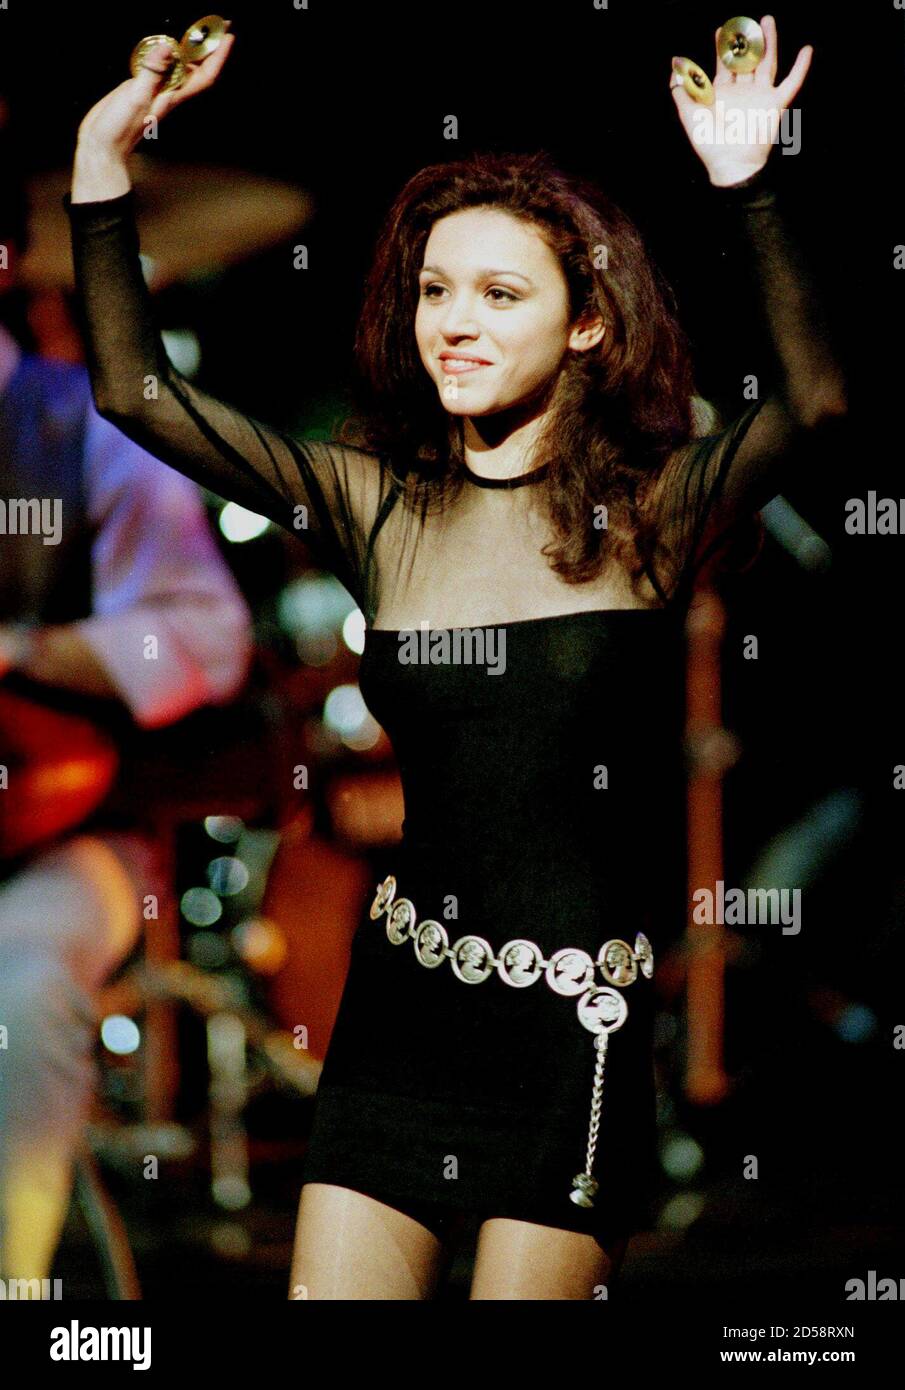 Eurovision song contest 1997 hi-res stock photography and images - Alamy